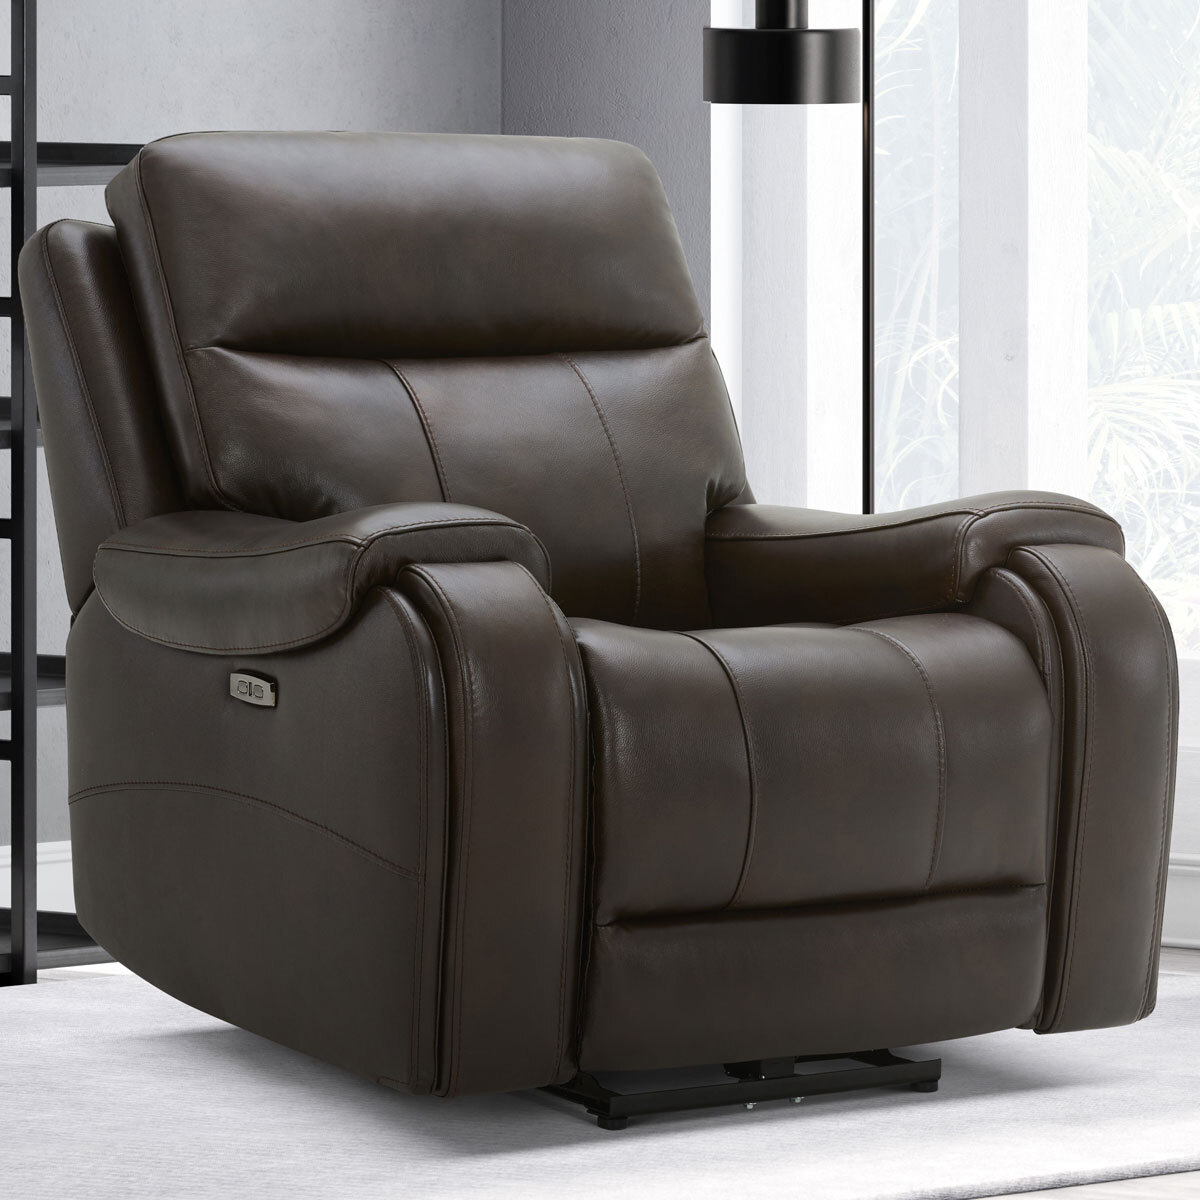 Childs Recliner Chair Costco Off 67